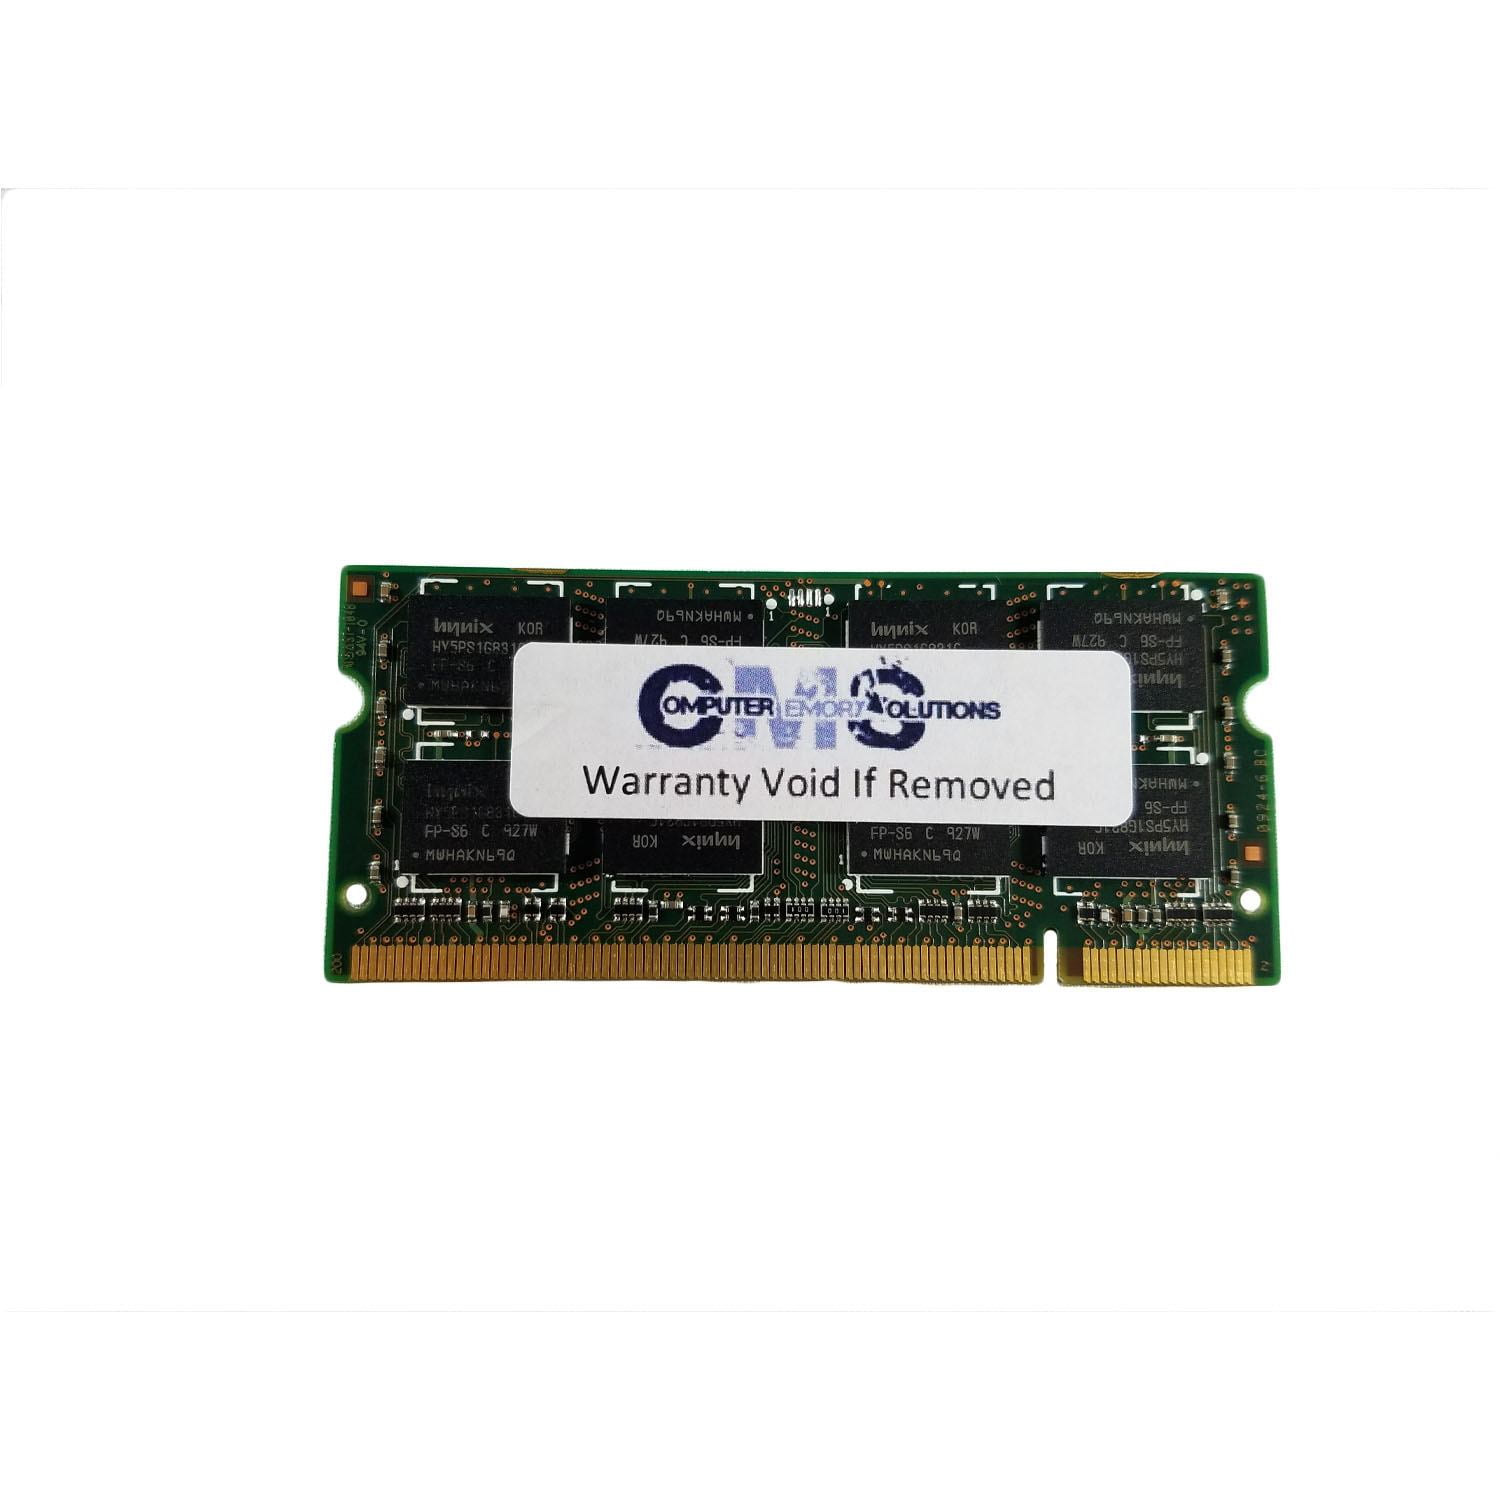 2GB Module DDR2 PC2-5300 667MHz Memory SODIMM for Acer Aspire 4530 